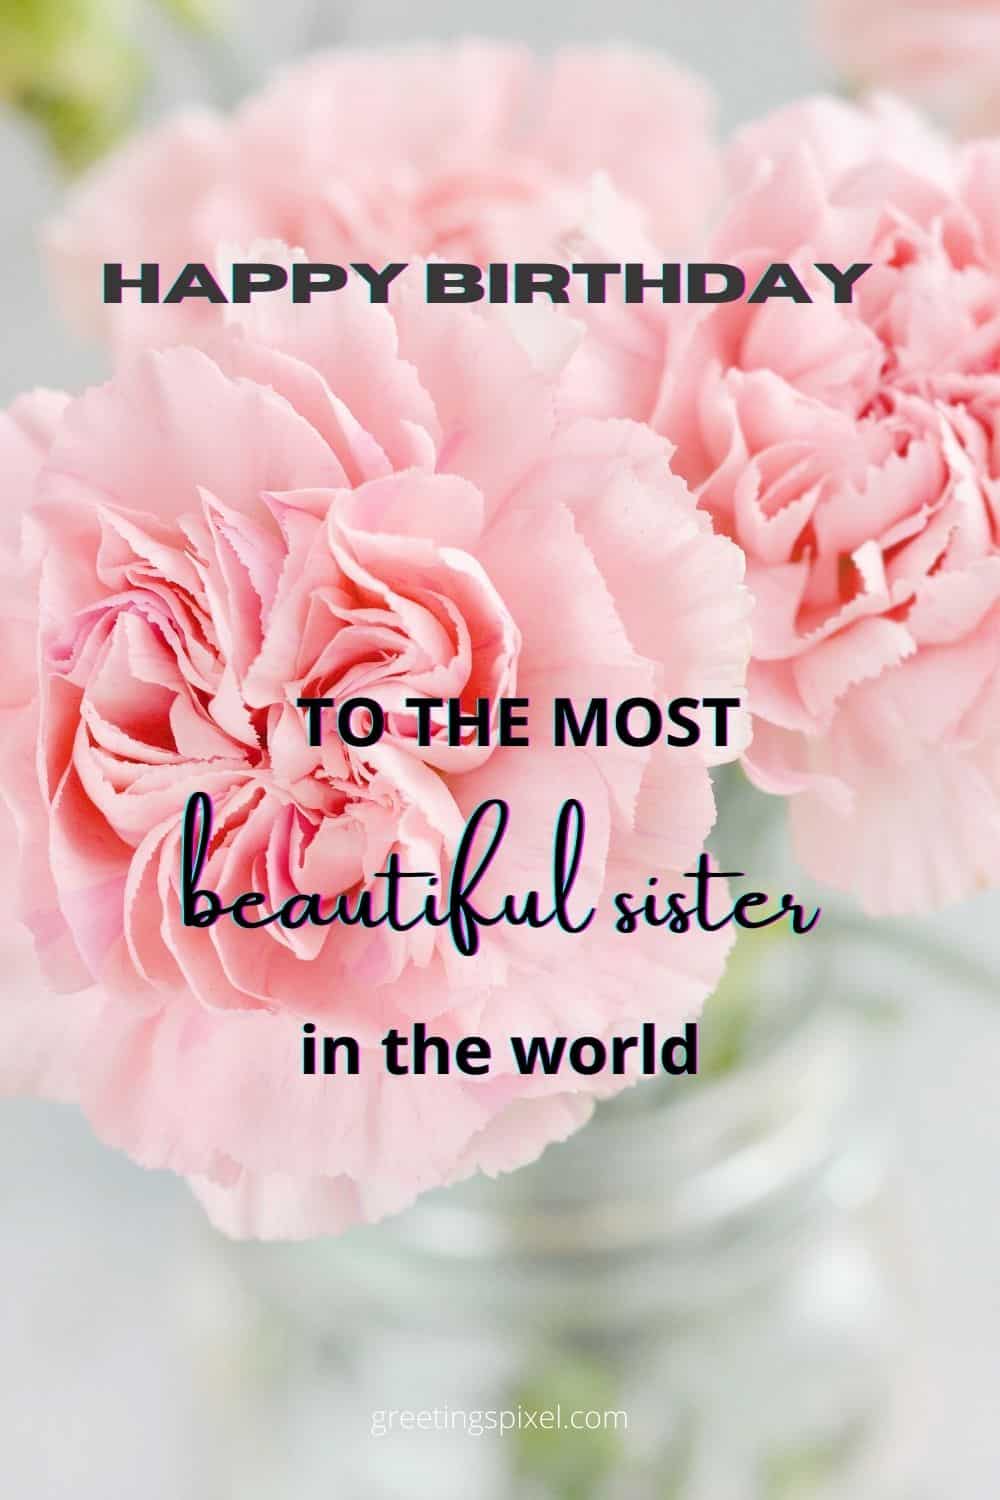 happy birthday images sister 4